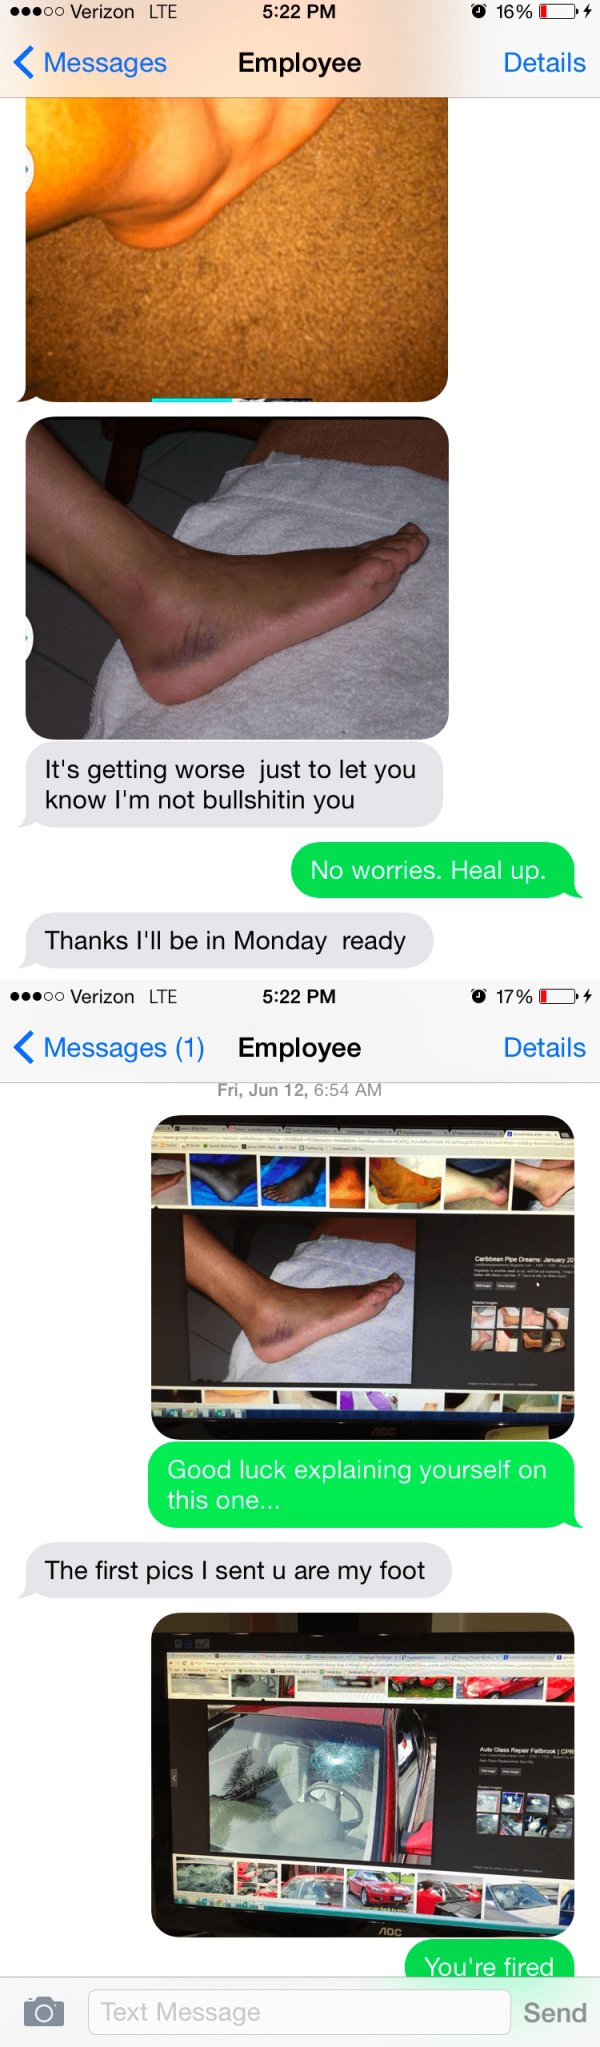 8 'Sick' Employees Who Got Caught Red-Handed by The Internet